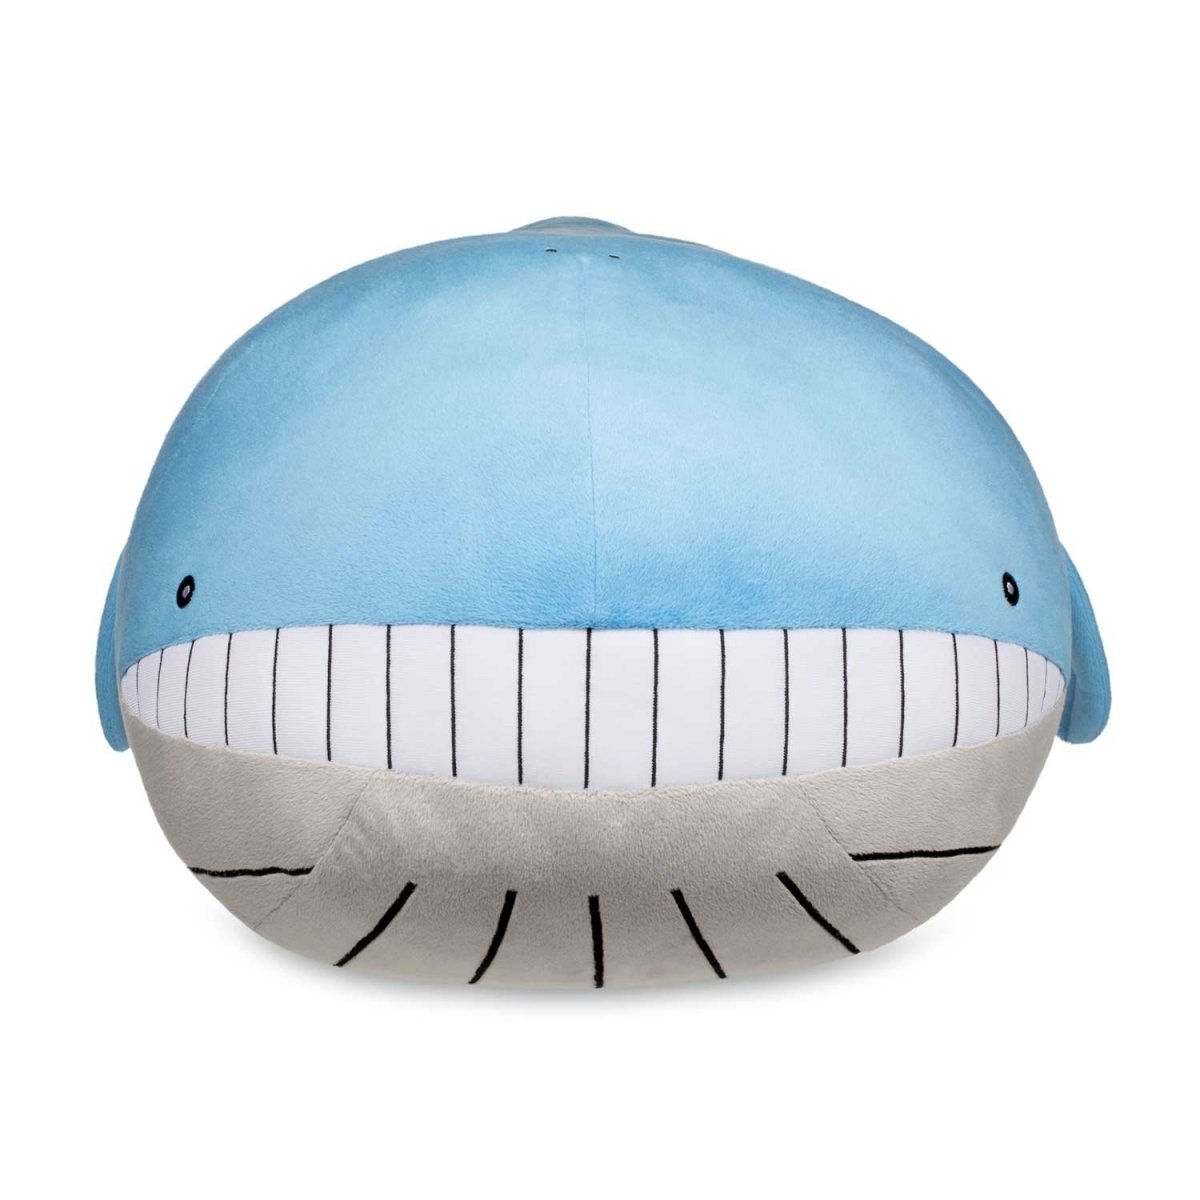 The Pokémon Center reveals huge Wailord plush toy, pre-orders open - Polygon